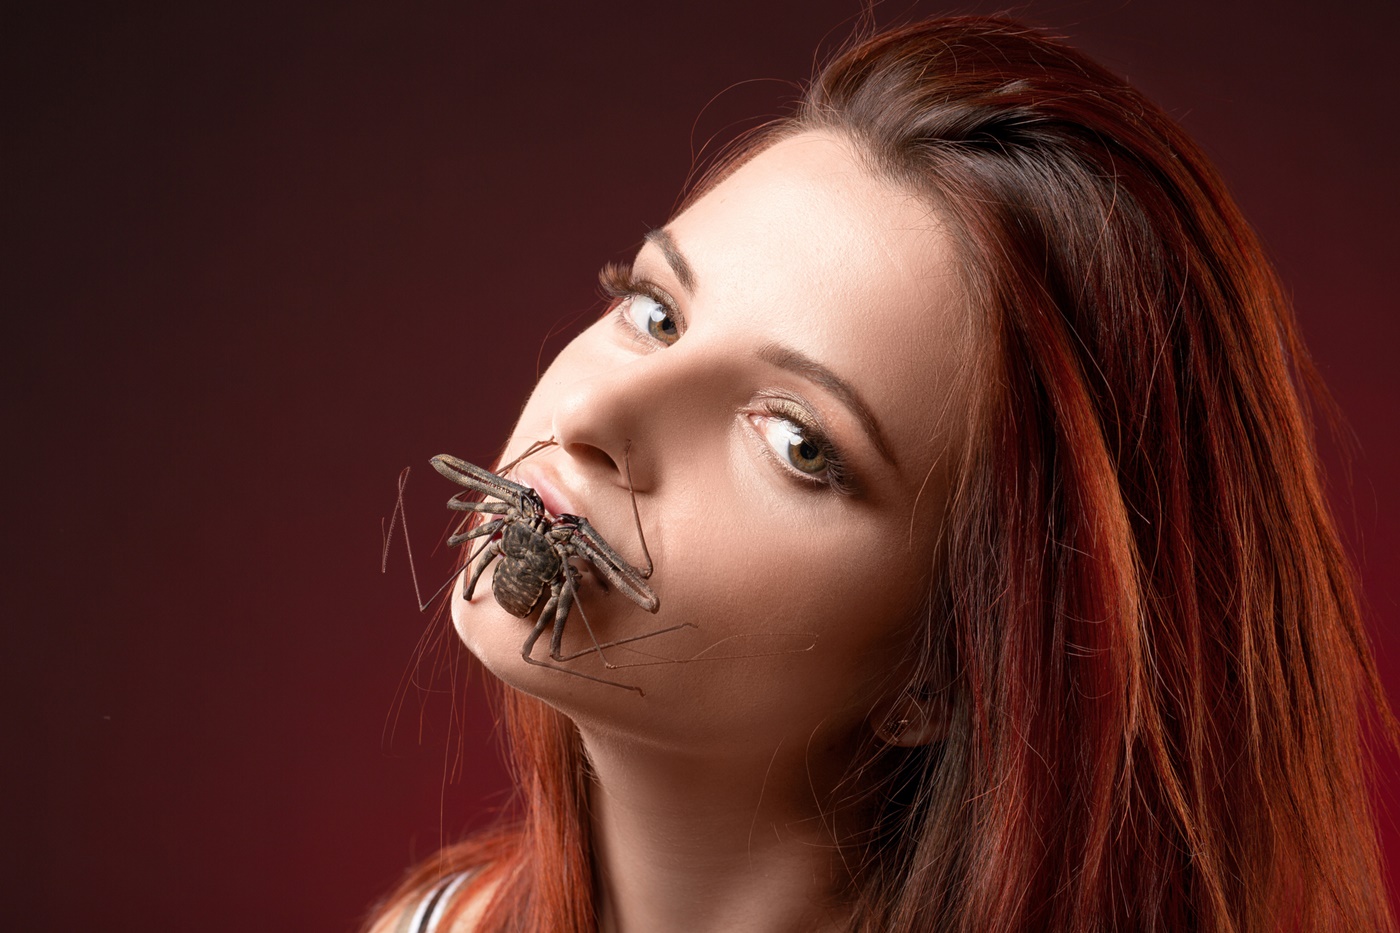 Large Insect Sitting on Woman's Mouth